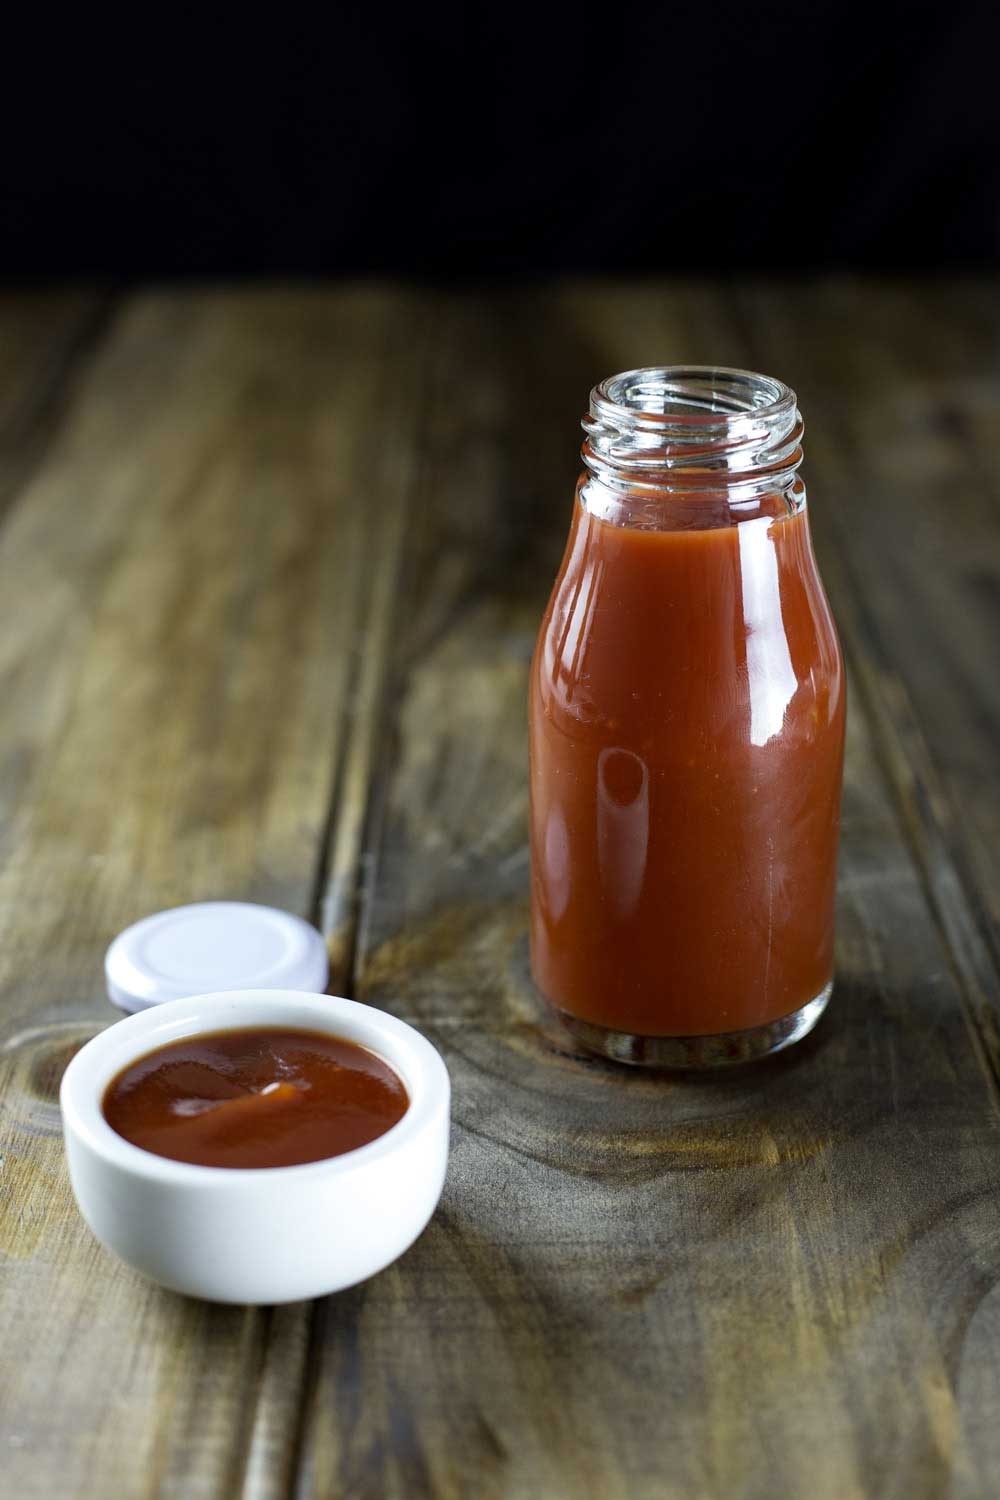 Homemade tomato ketchup. This ketchup is so much better than anything you can buy at the shop. And it is free from corn syrup and other nasties!